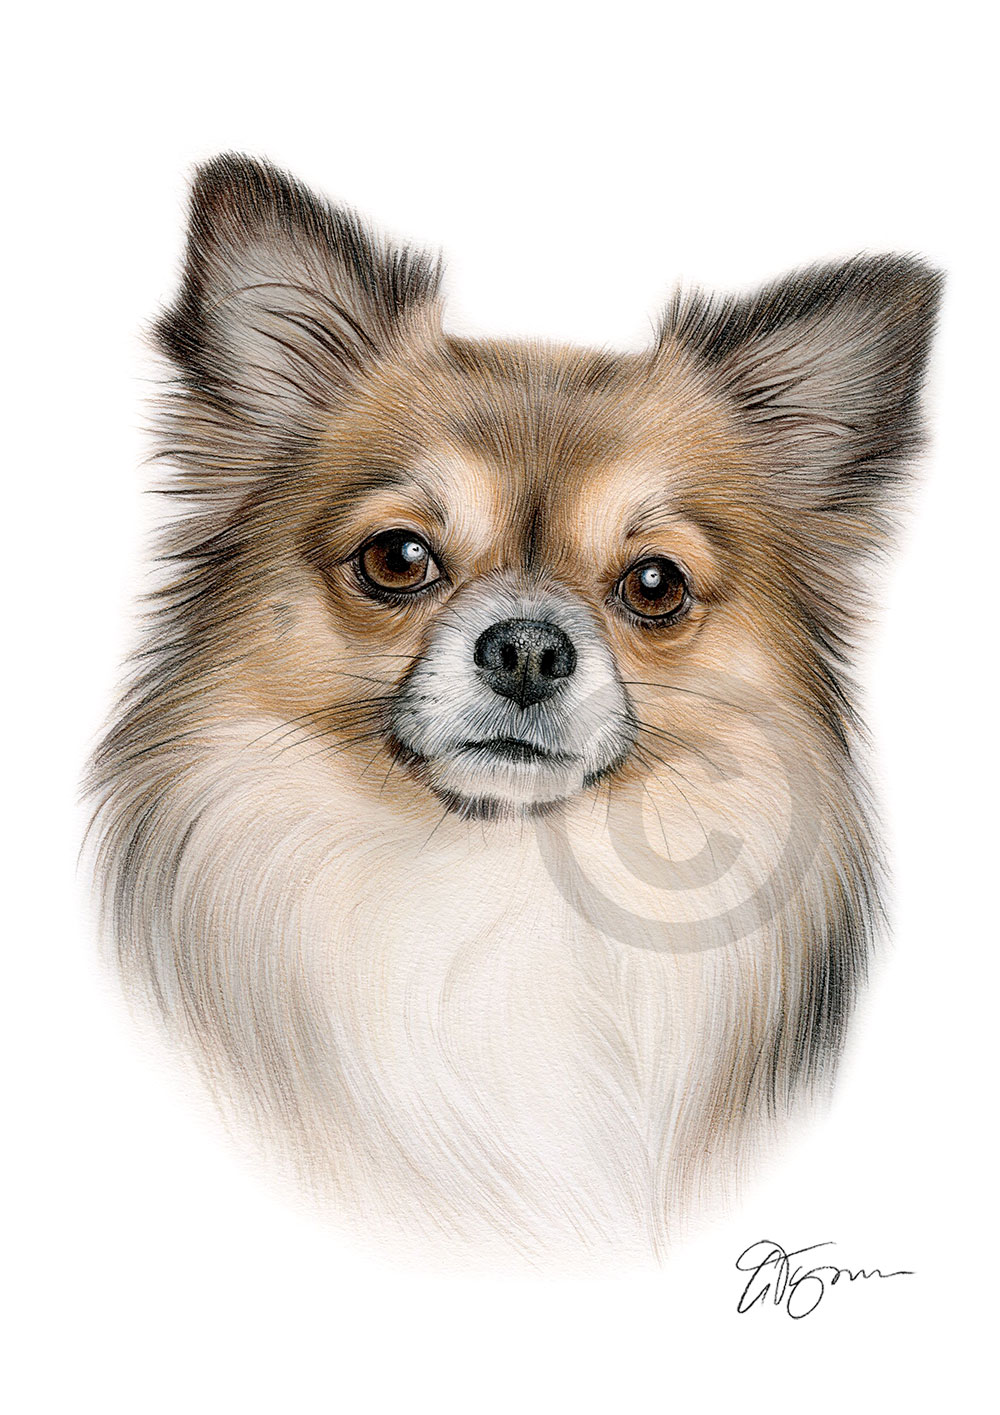 Colour pencil drawing of a Chihuahua by artist Gary Tymon